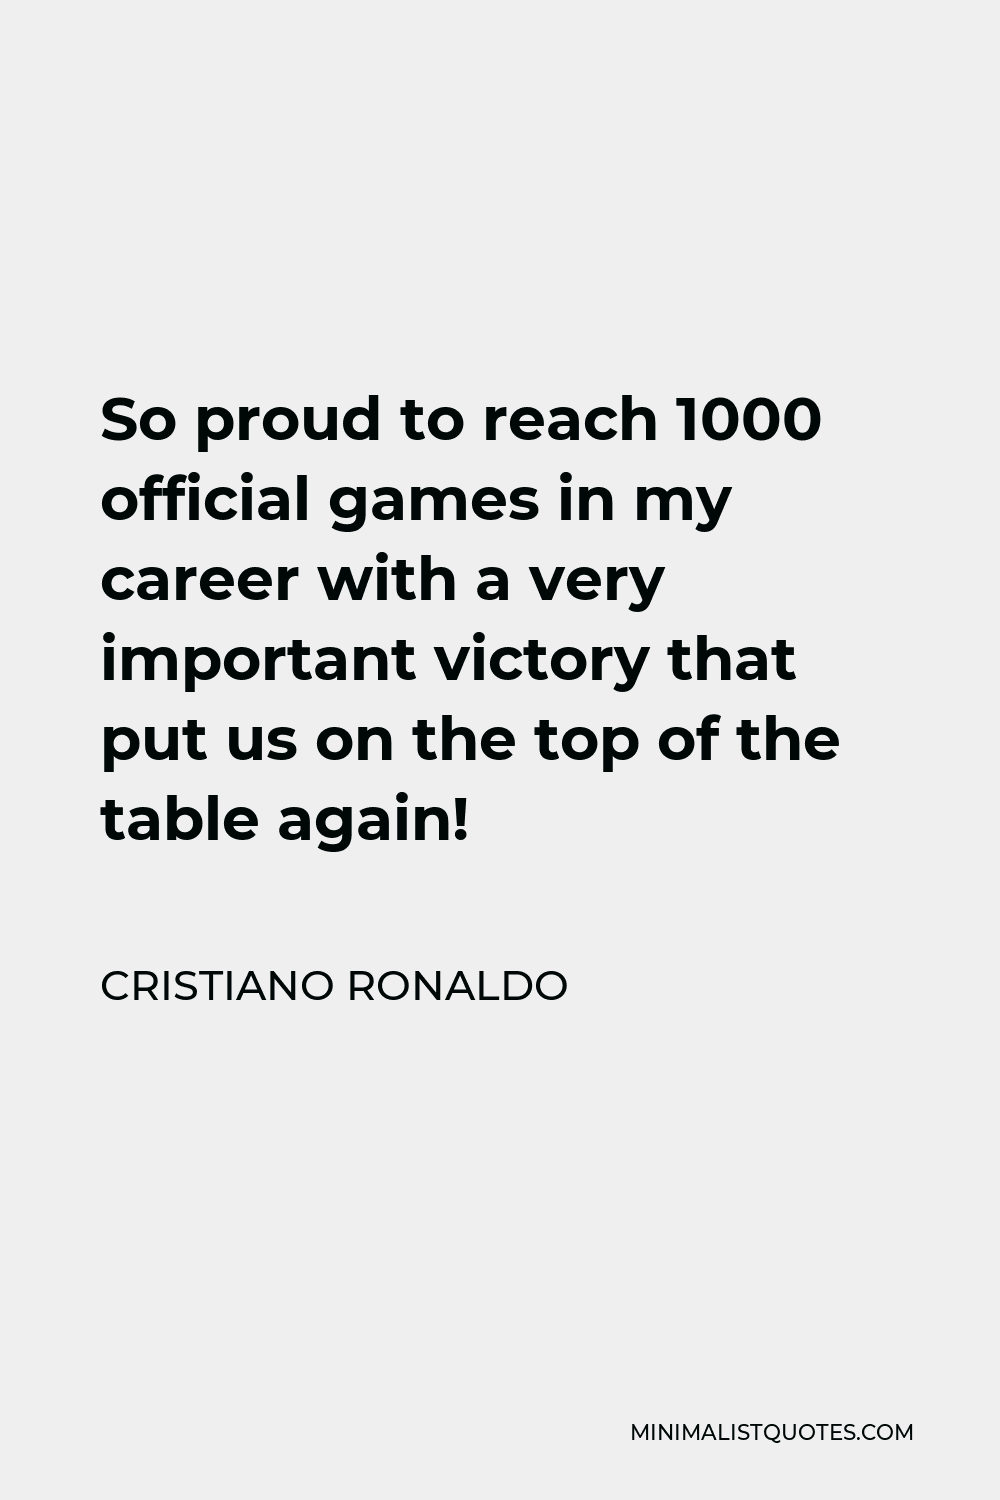 Cristiano Ronaldo Quote - So proud to reach 1000 official games in my career with a very important victory that put us on the top of the table again!